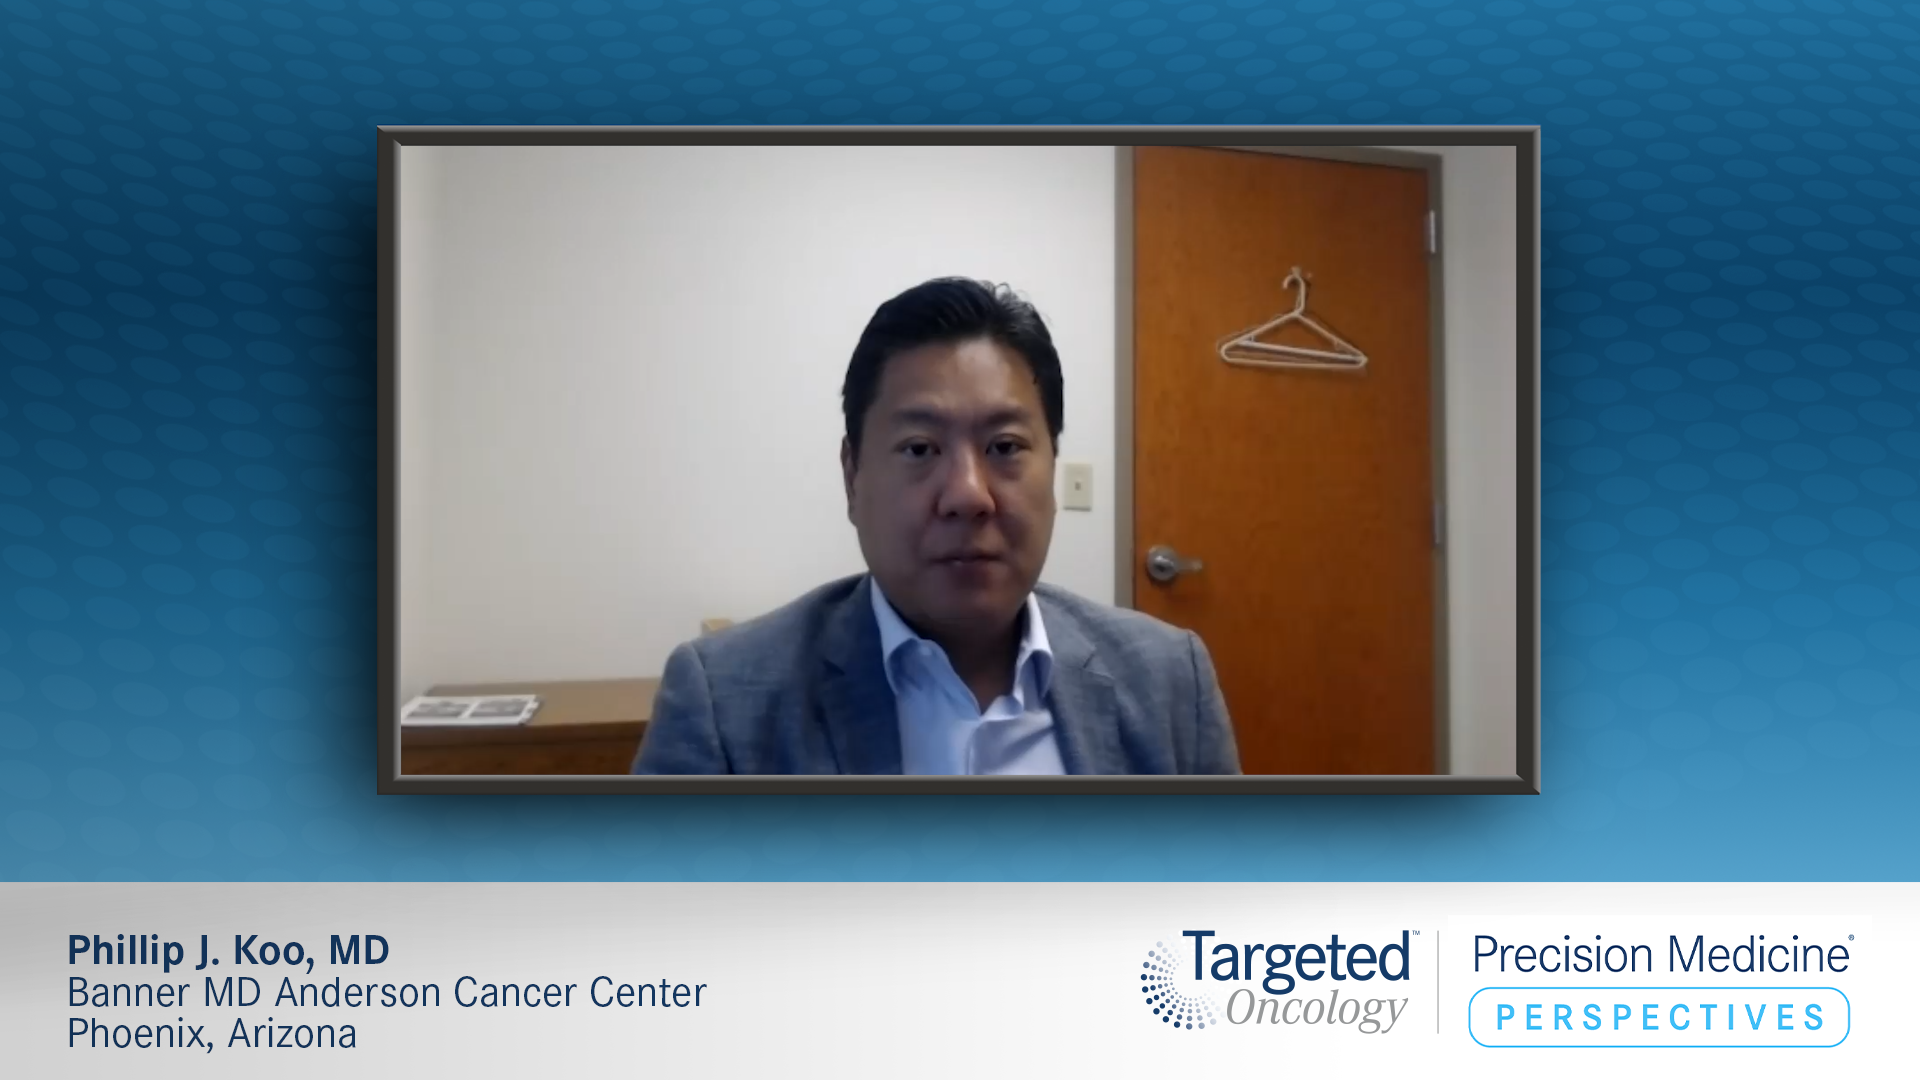 EP. 2A: The Role of Nuclear Imaging (PET) and PSMA in Prostate Cancer Therapy